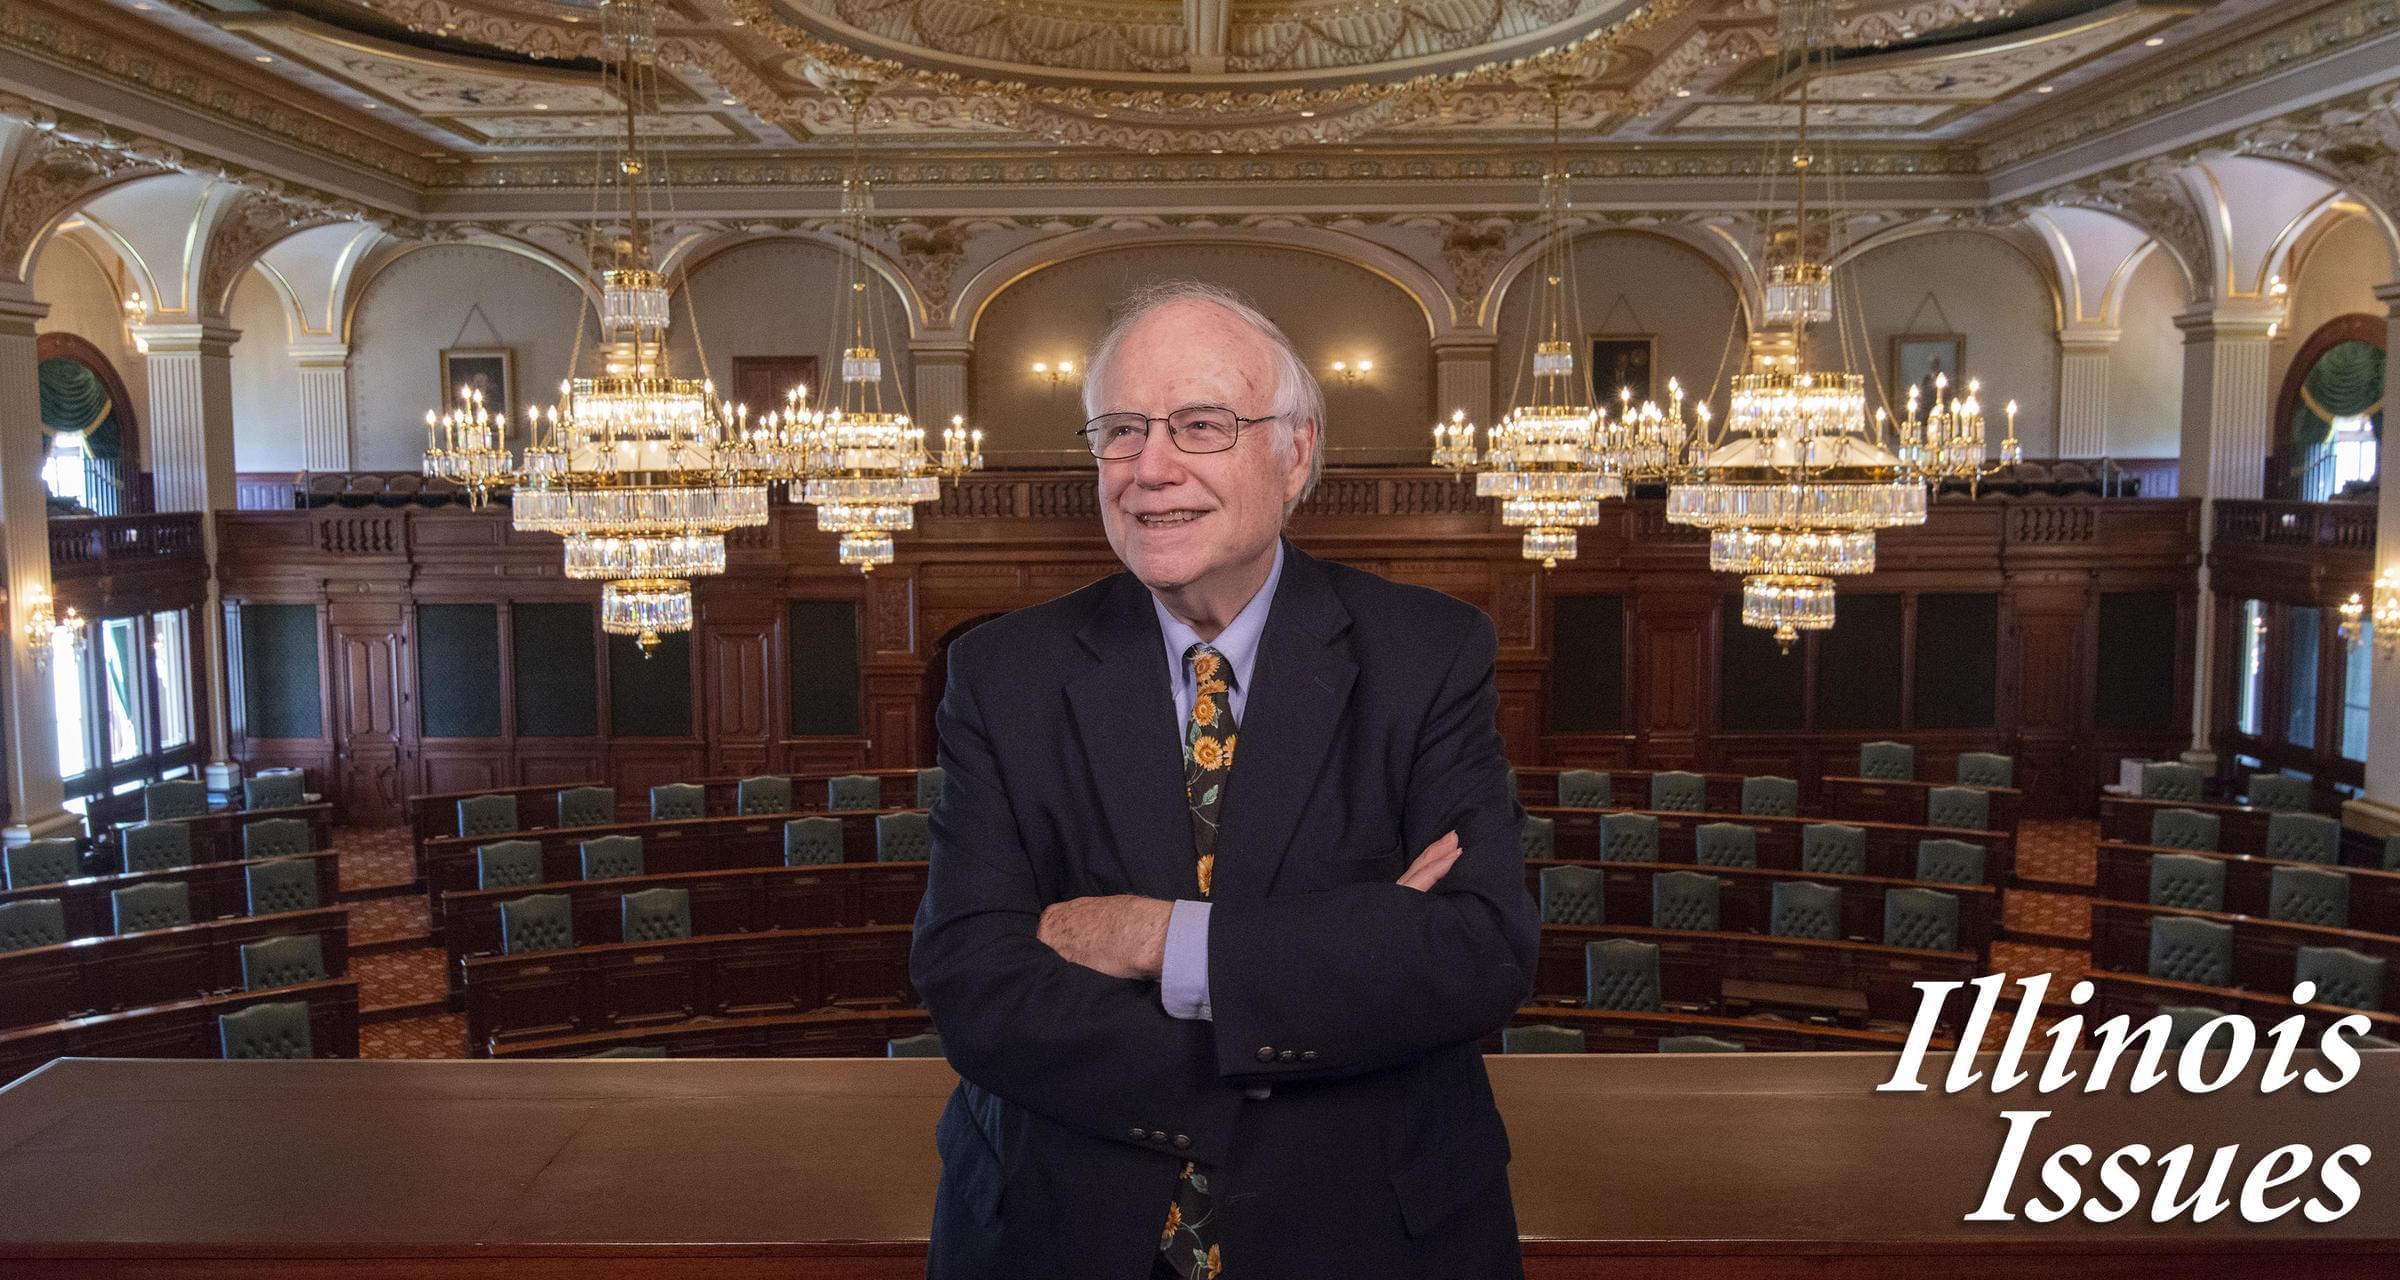 Charlie Wheeler began covering Illinois government five decades ago at the 1970 Constitutional Convention.